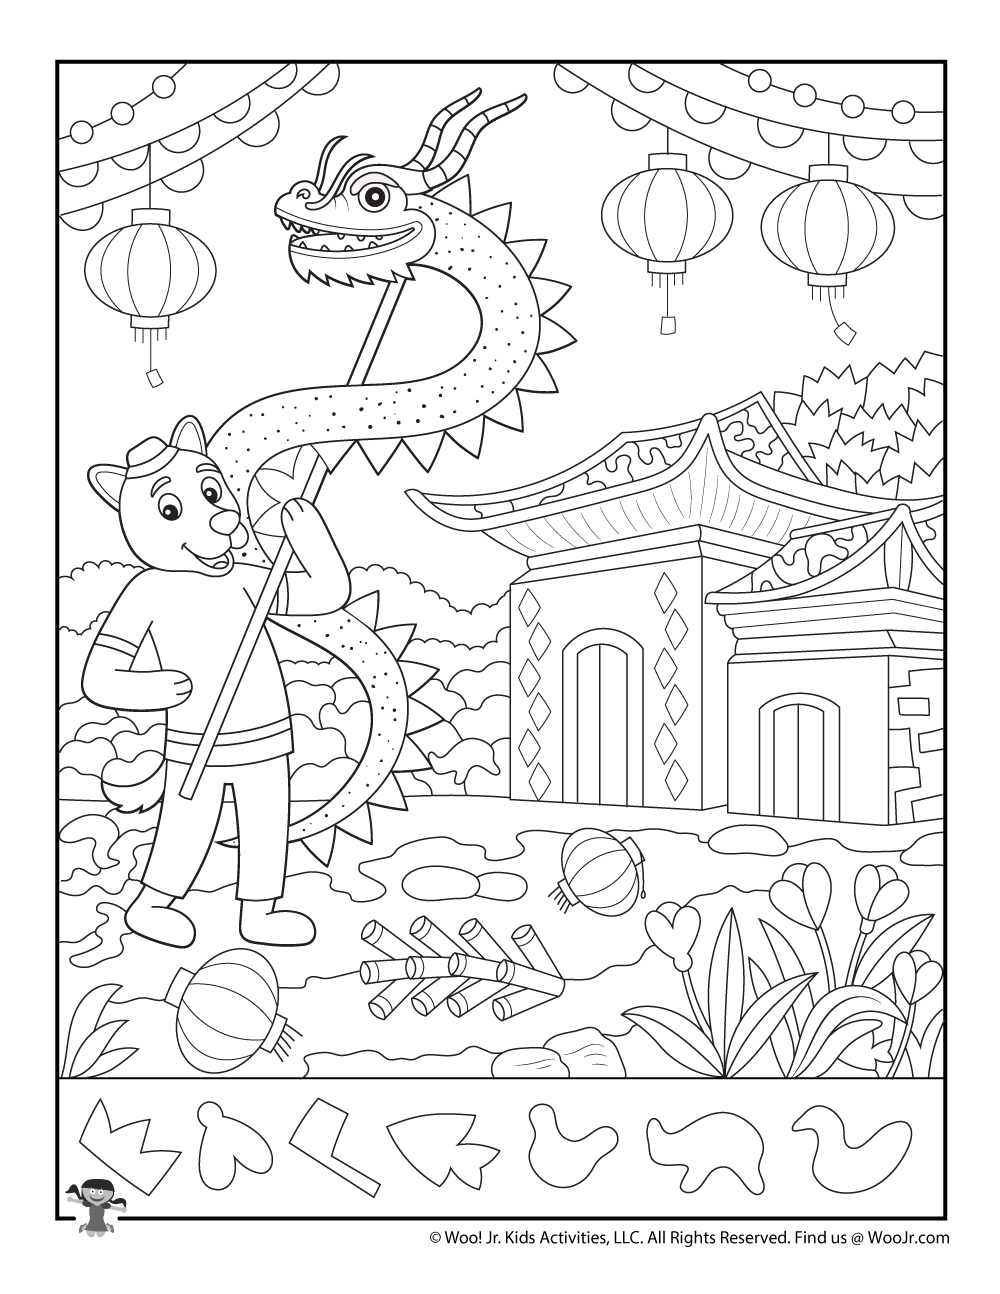 Year of the Dog Hidden Objects Printable | Woo! Jr. Kids Activities :  Children's Publishing